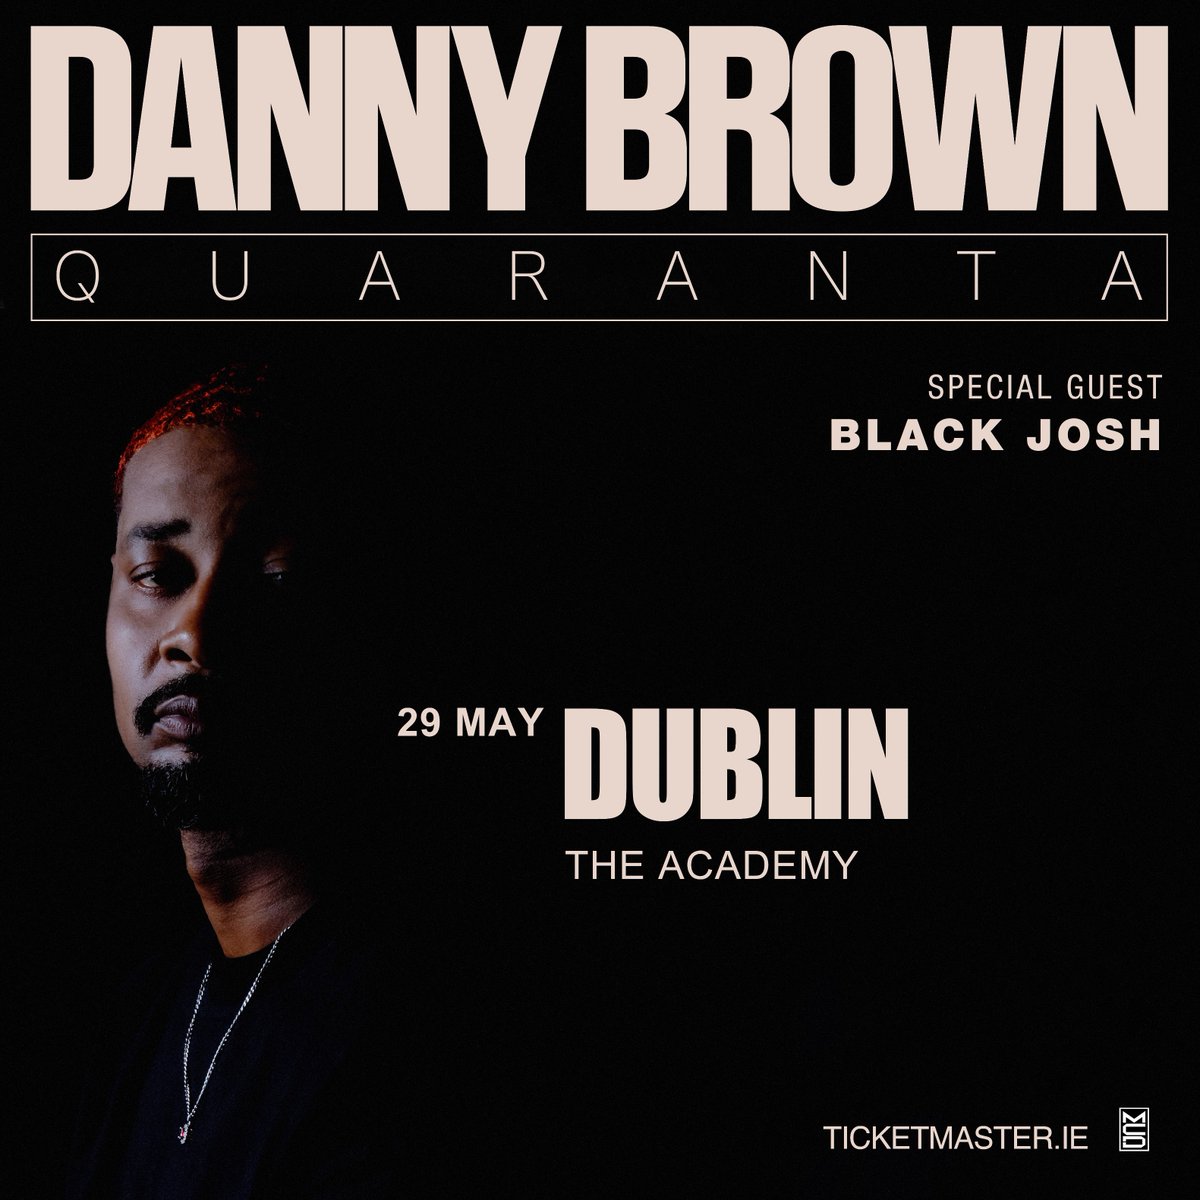 ⚡ @xDannyxBrownx will be joined by special guest Black Josh when he comes to @AcademyDublin on 29 May. 🎫 Limited tickets available bit.ly/4bk4H03